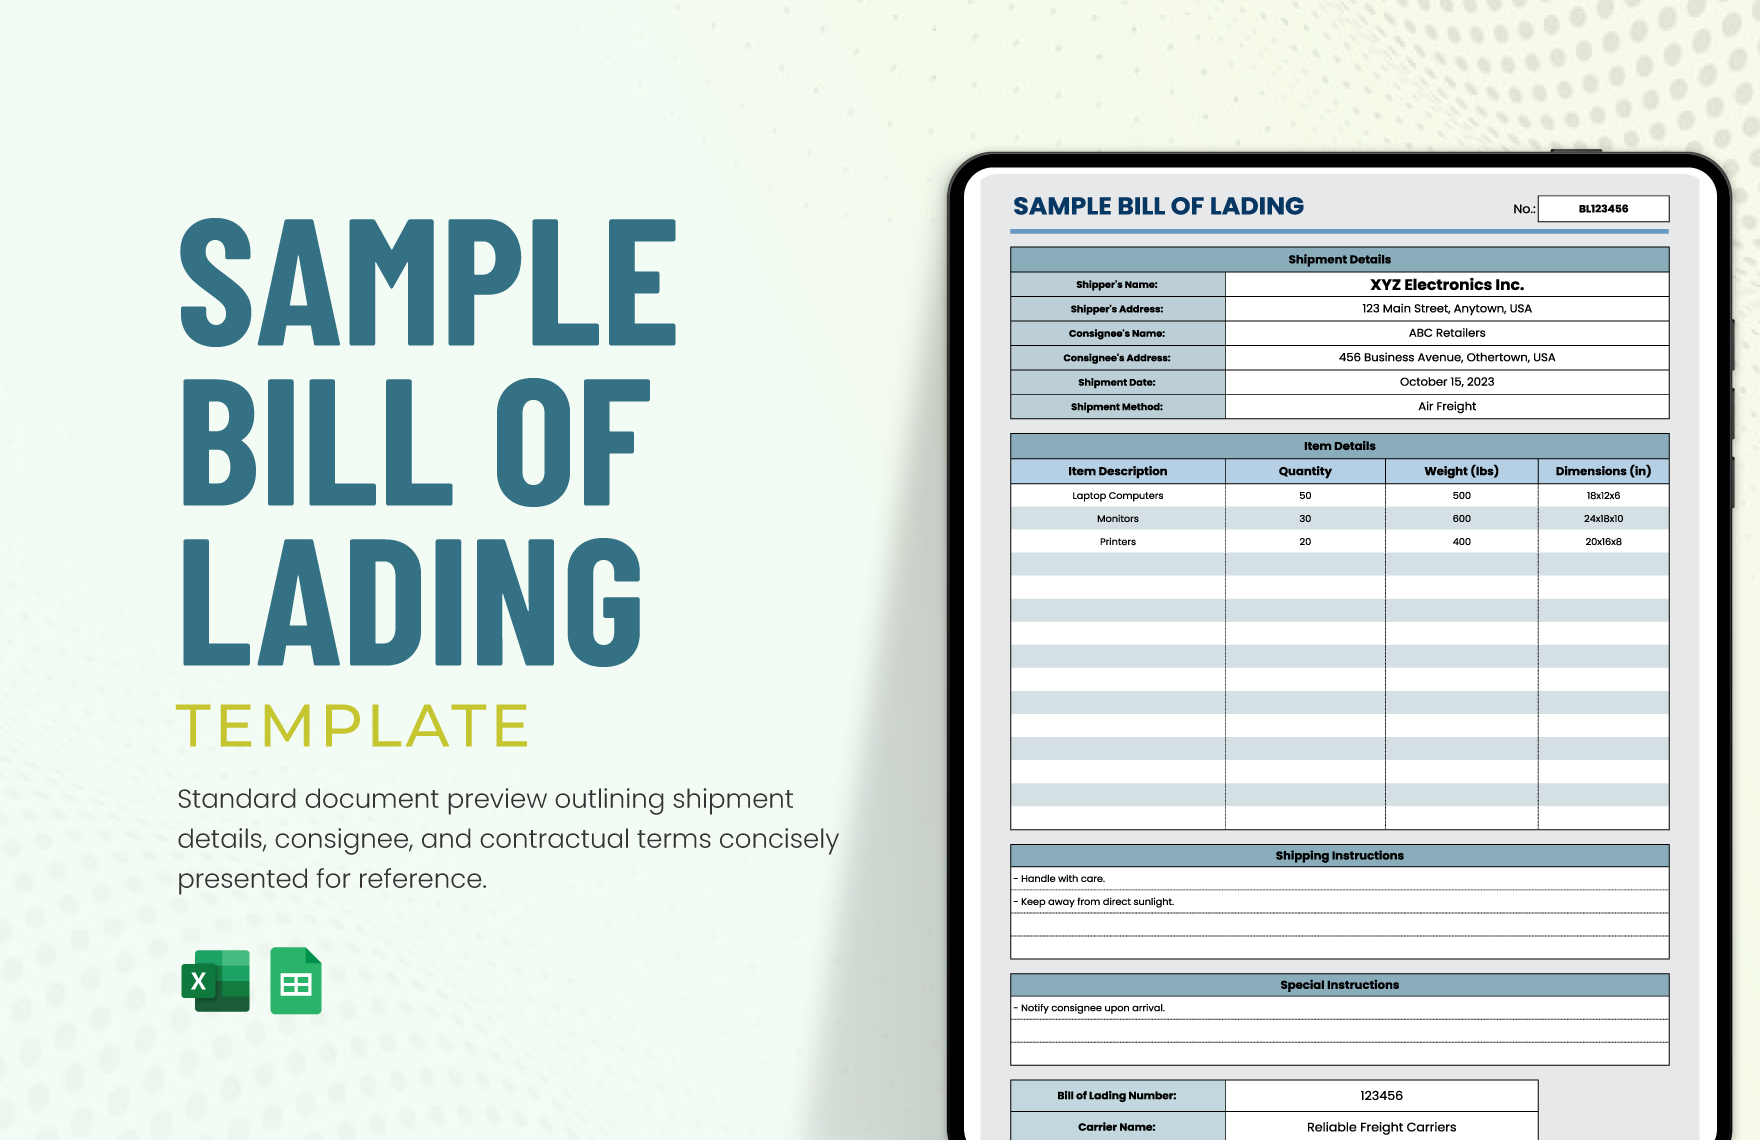 Free Sample Bill of Lading Template in Excel, Google Sheets